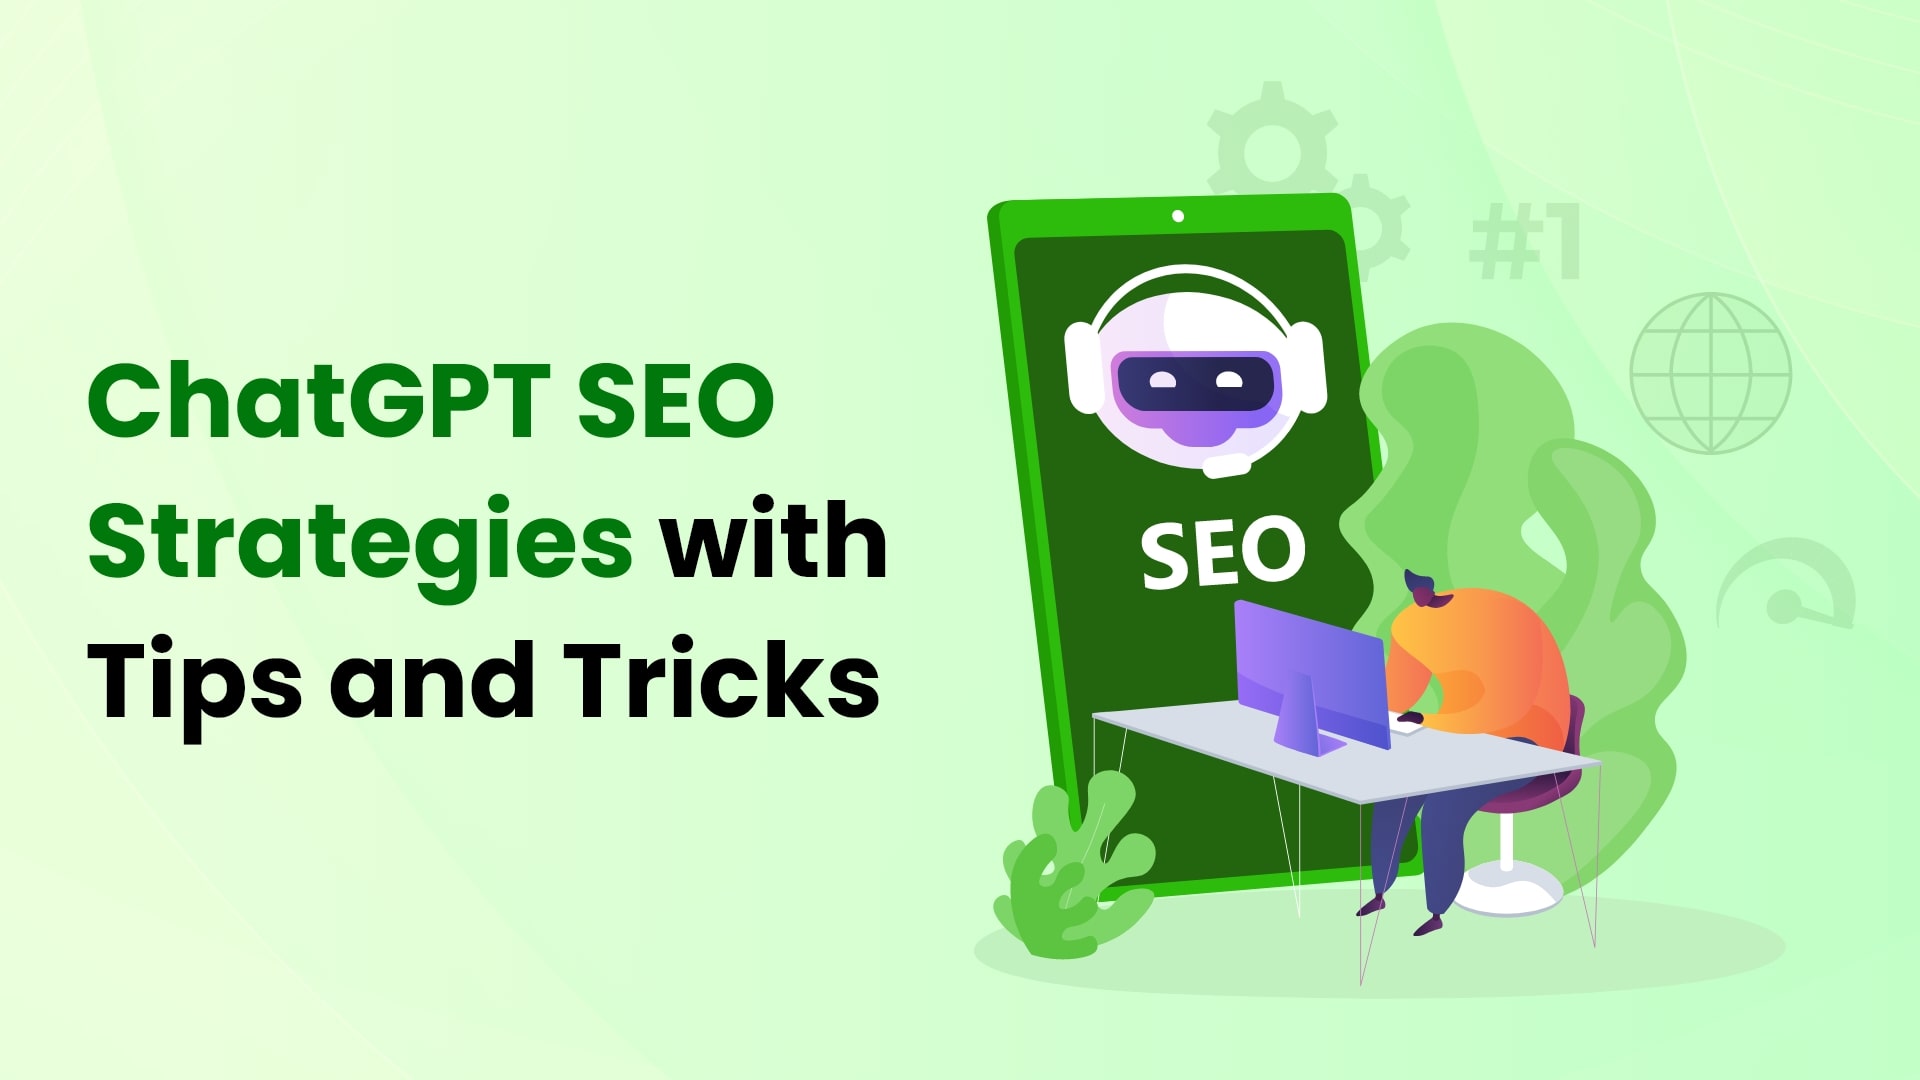 ChatGPT SEO Strategies with Tips and Tricks